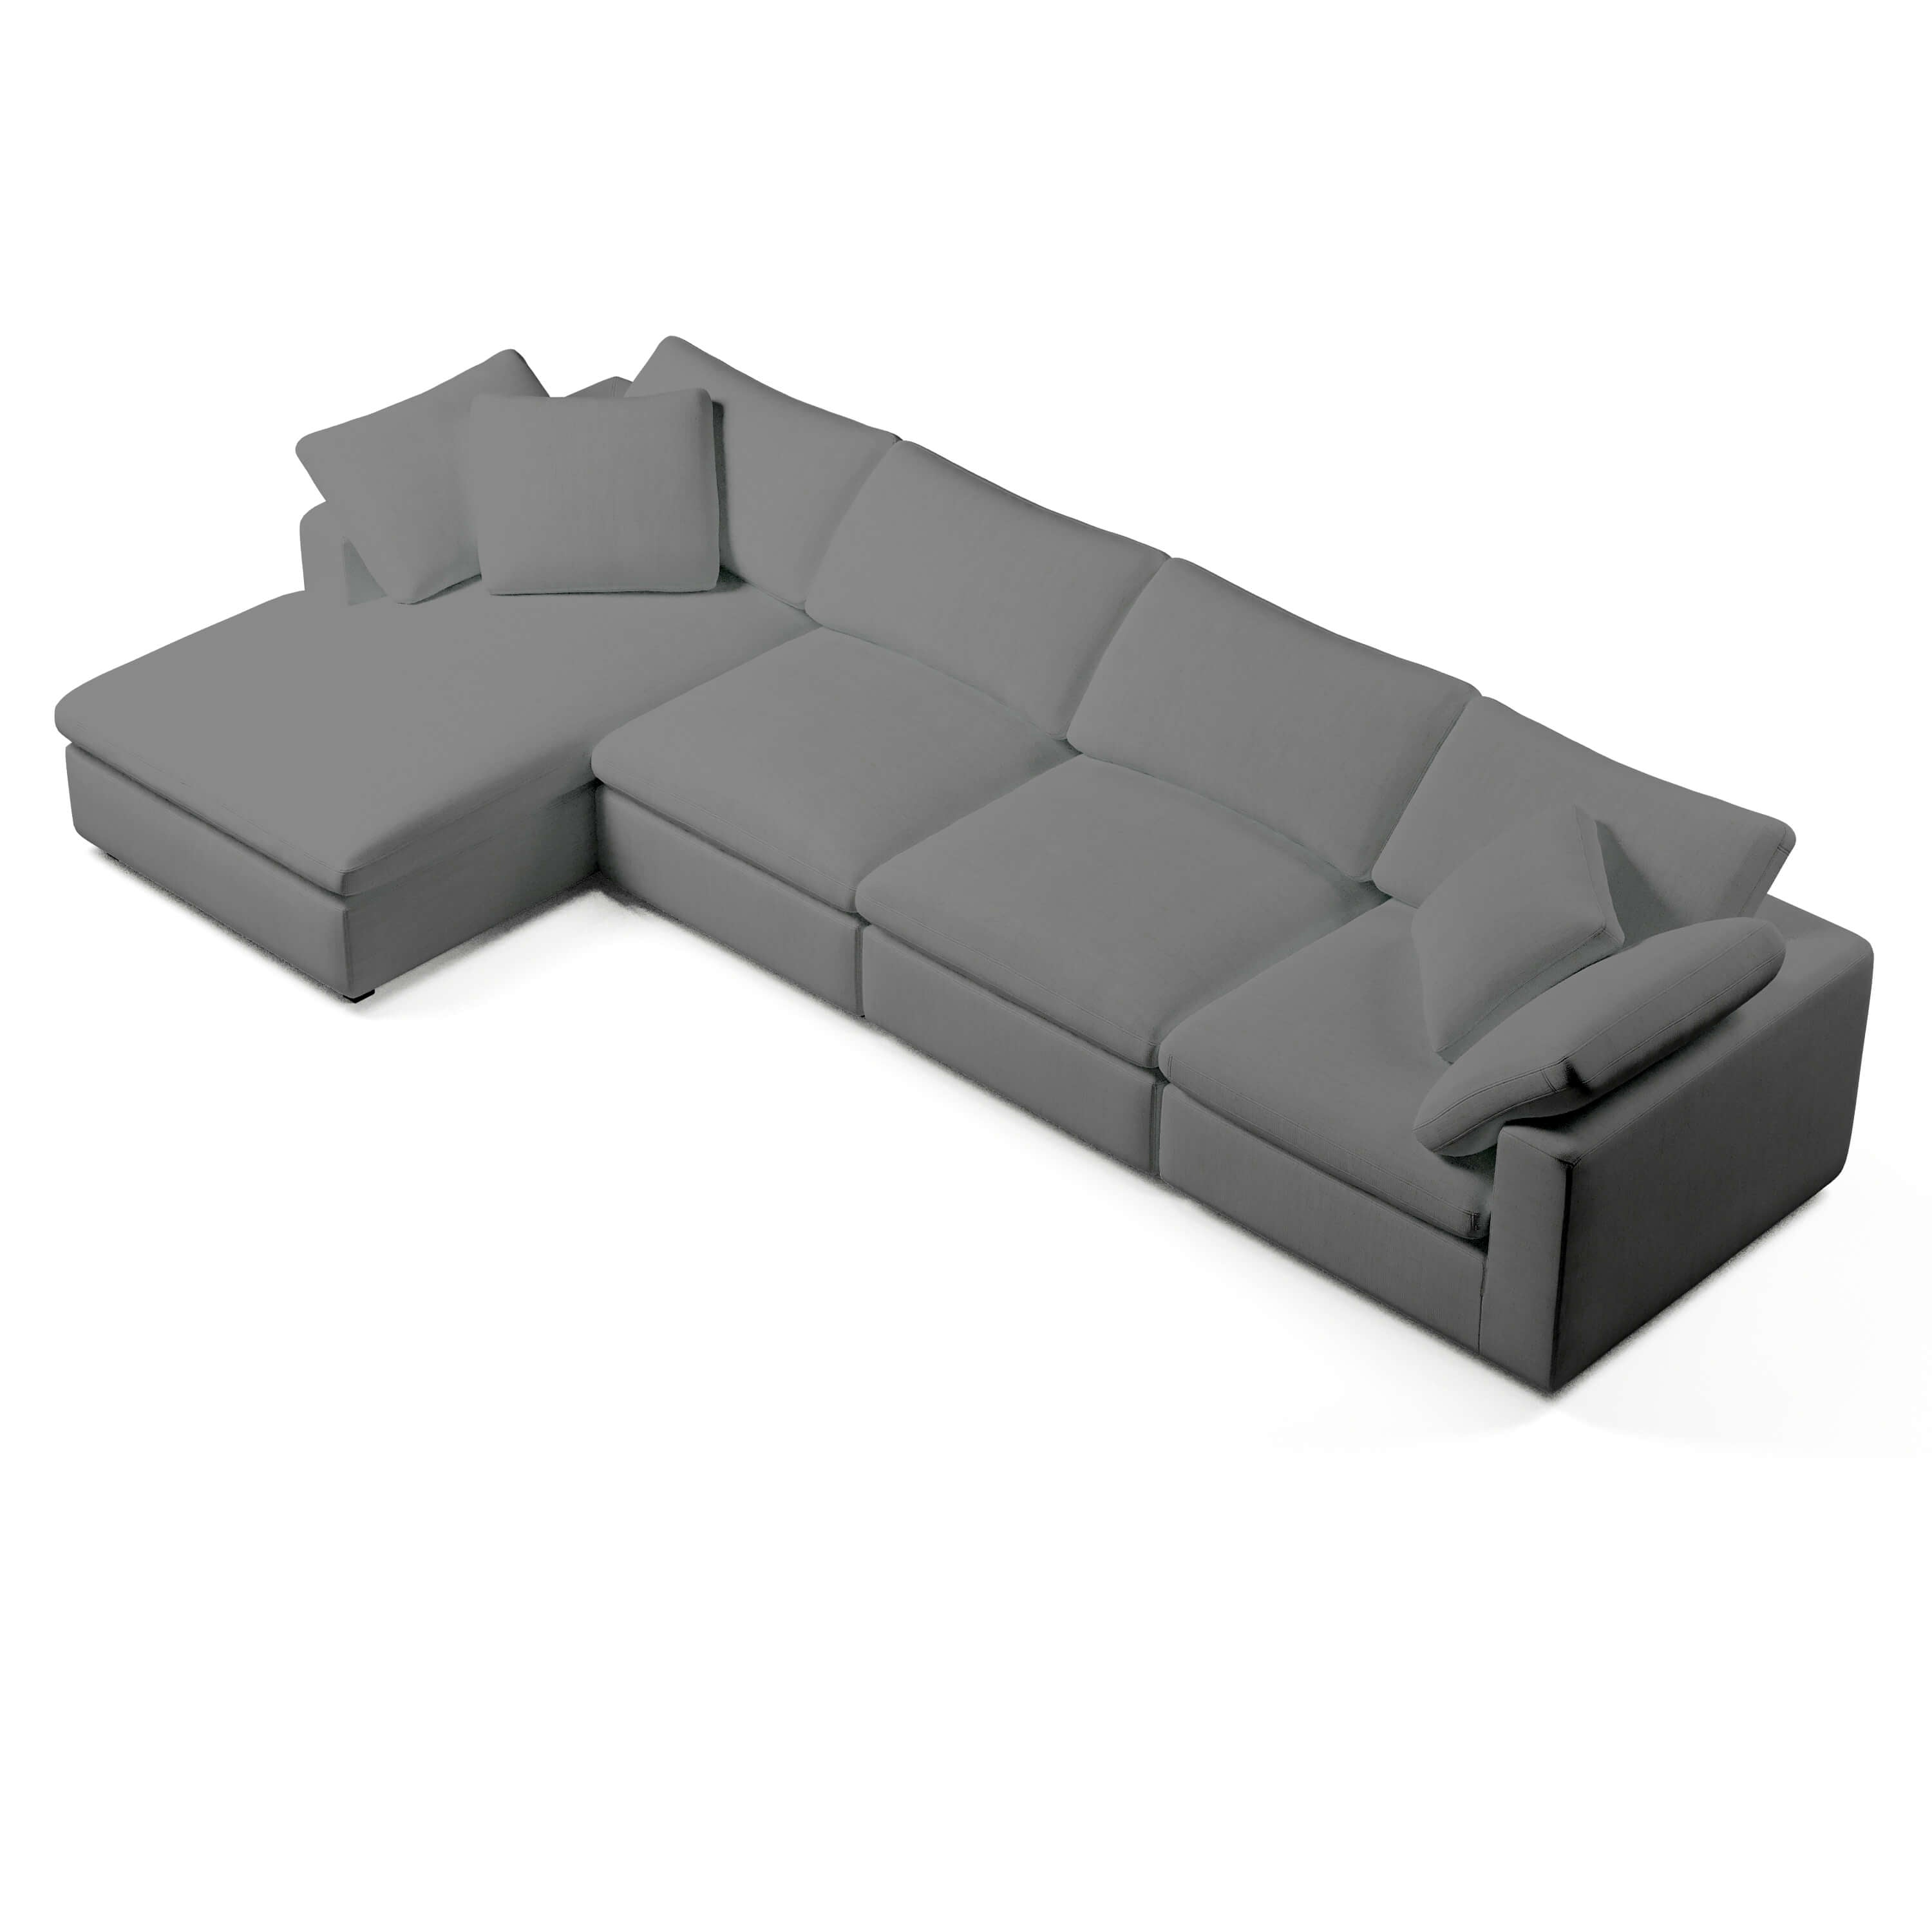 Comfy Modular Sofa - 4-Seater Chaise Sectional - Left Hand Facing